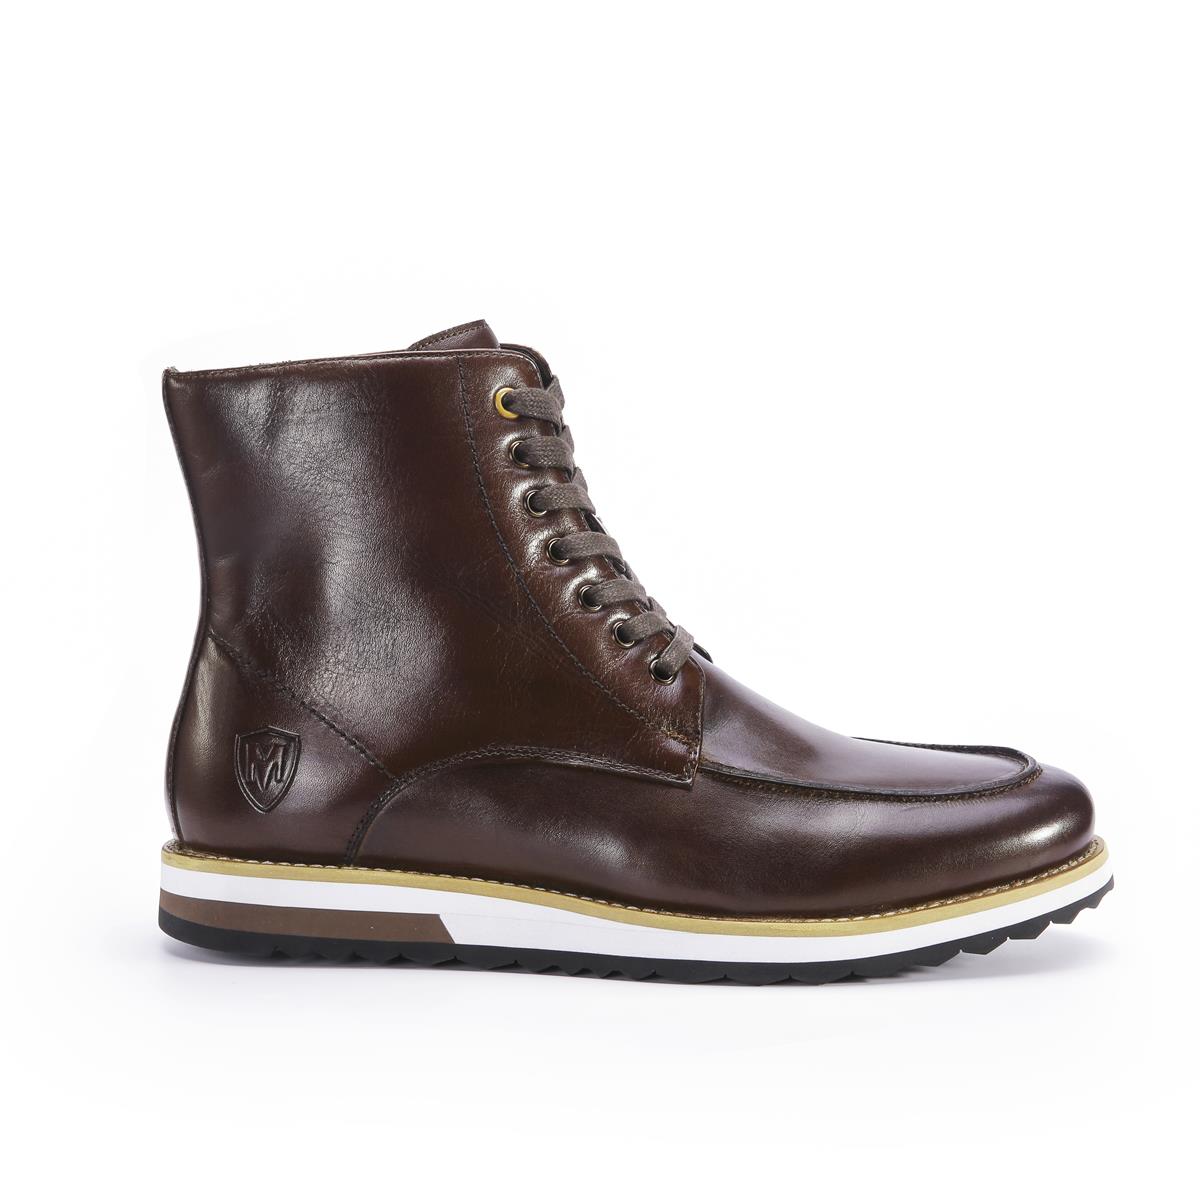 LONDON brown leather boots